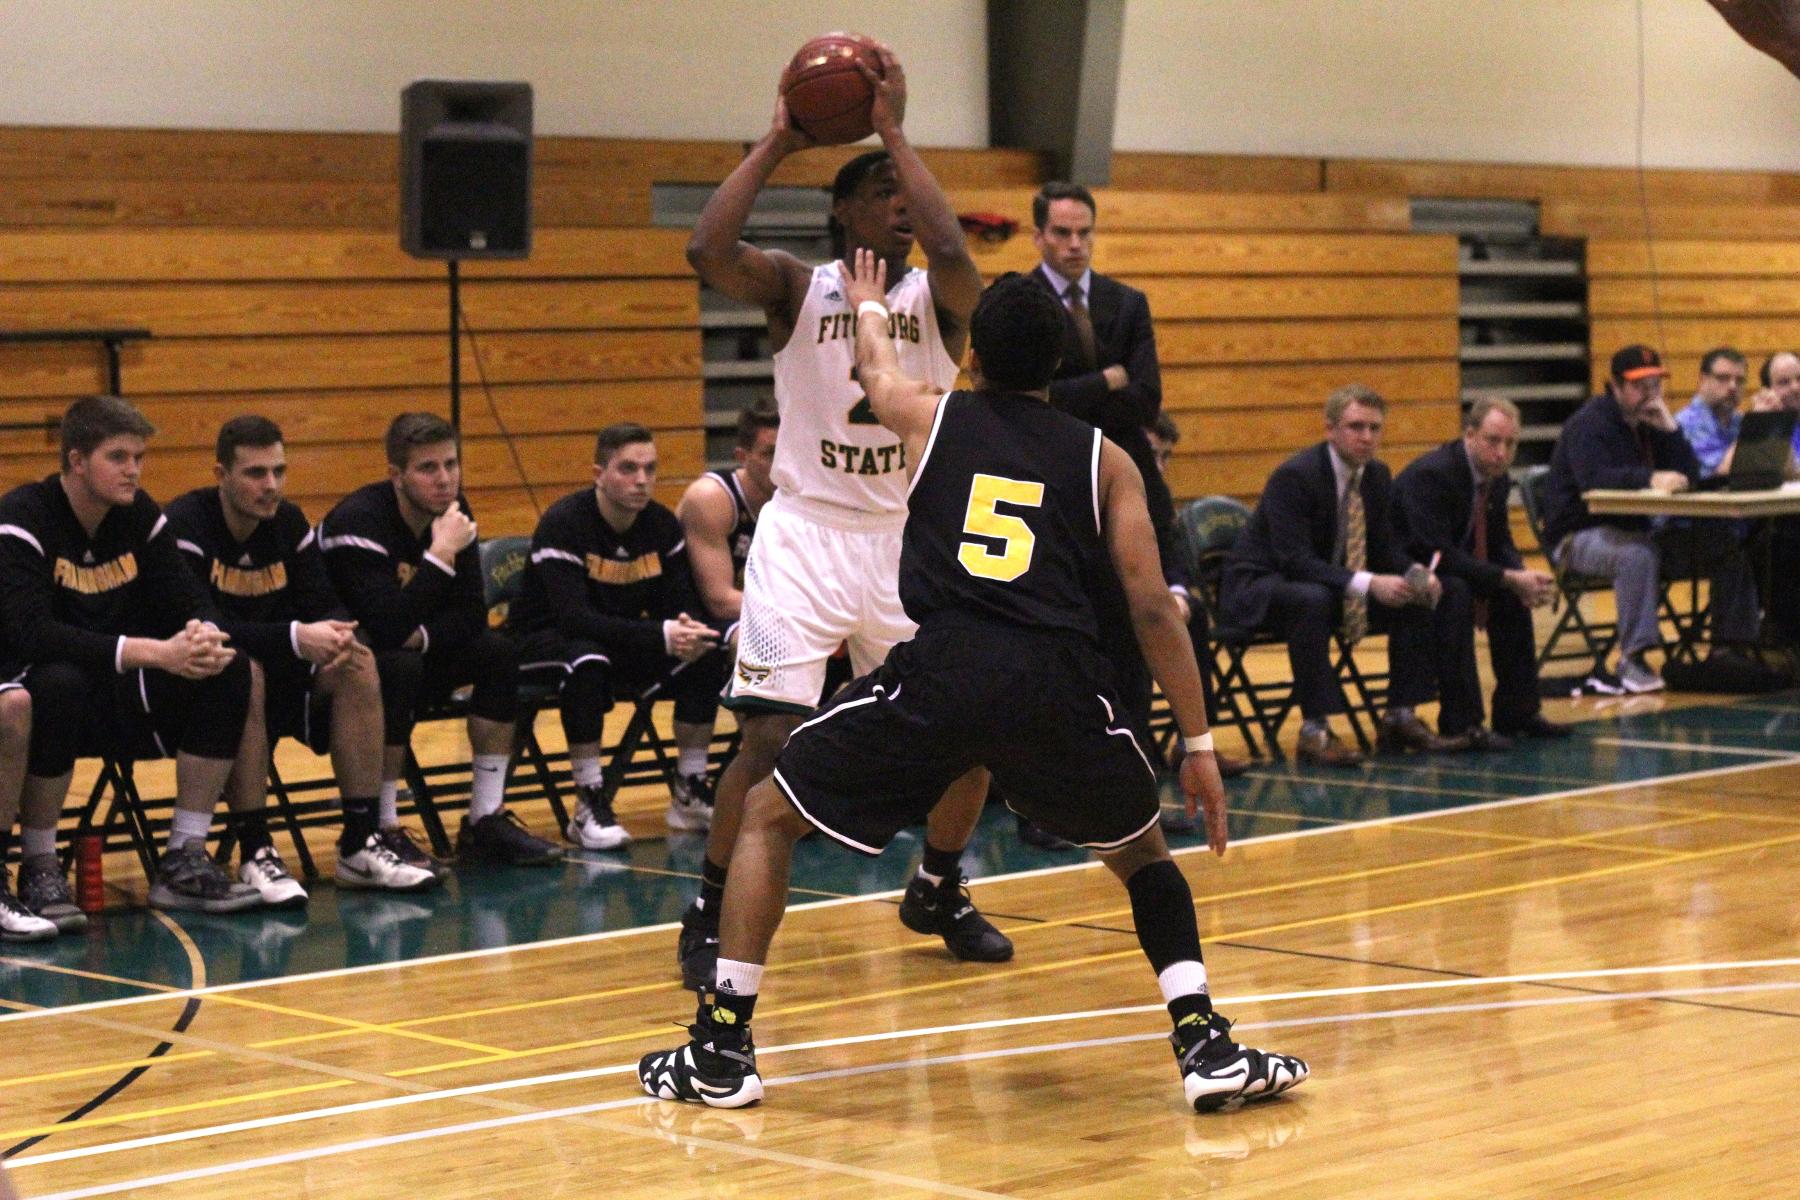 Fitchburg State Earns Top Seed and a Share of the MASCAC Regular-Season Crown with a 60-53 Win at Framingham